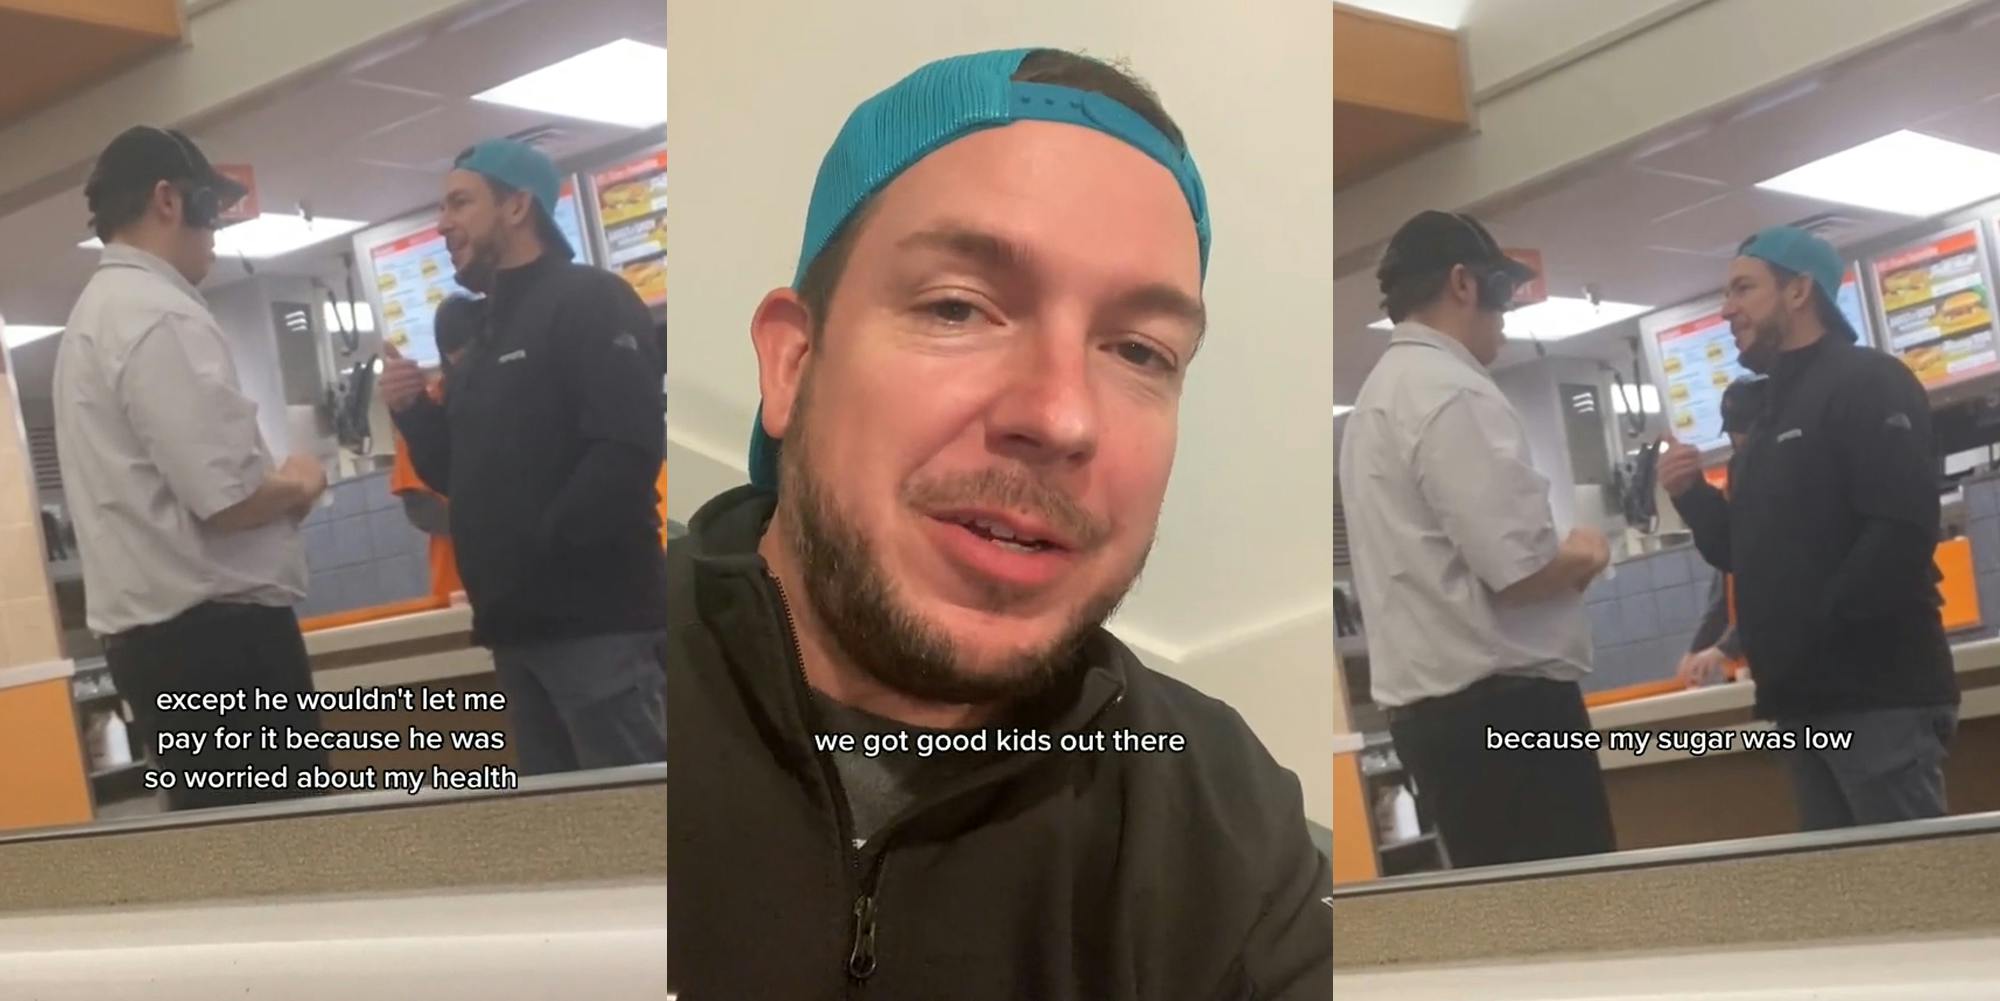 customer speaking to Whataburger manager with caption "except he wouldn't let me pay for it because he was so worried about my health" (l) customer speaking with caption "we got good kids out there" (c) customer speaking to Whataburger manager with caption "because my blood sugar was low" (r)